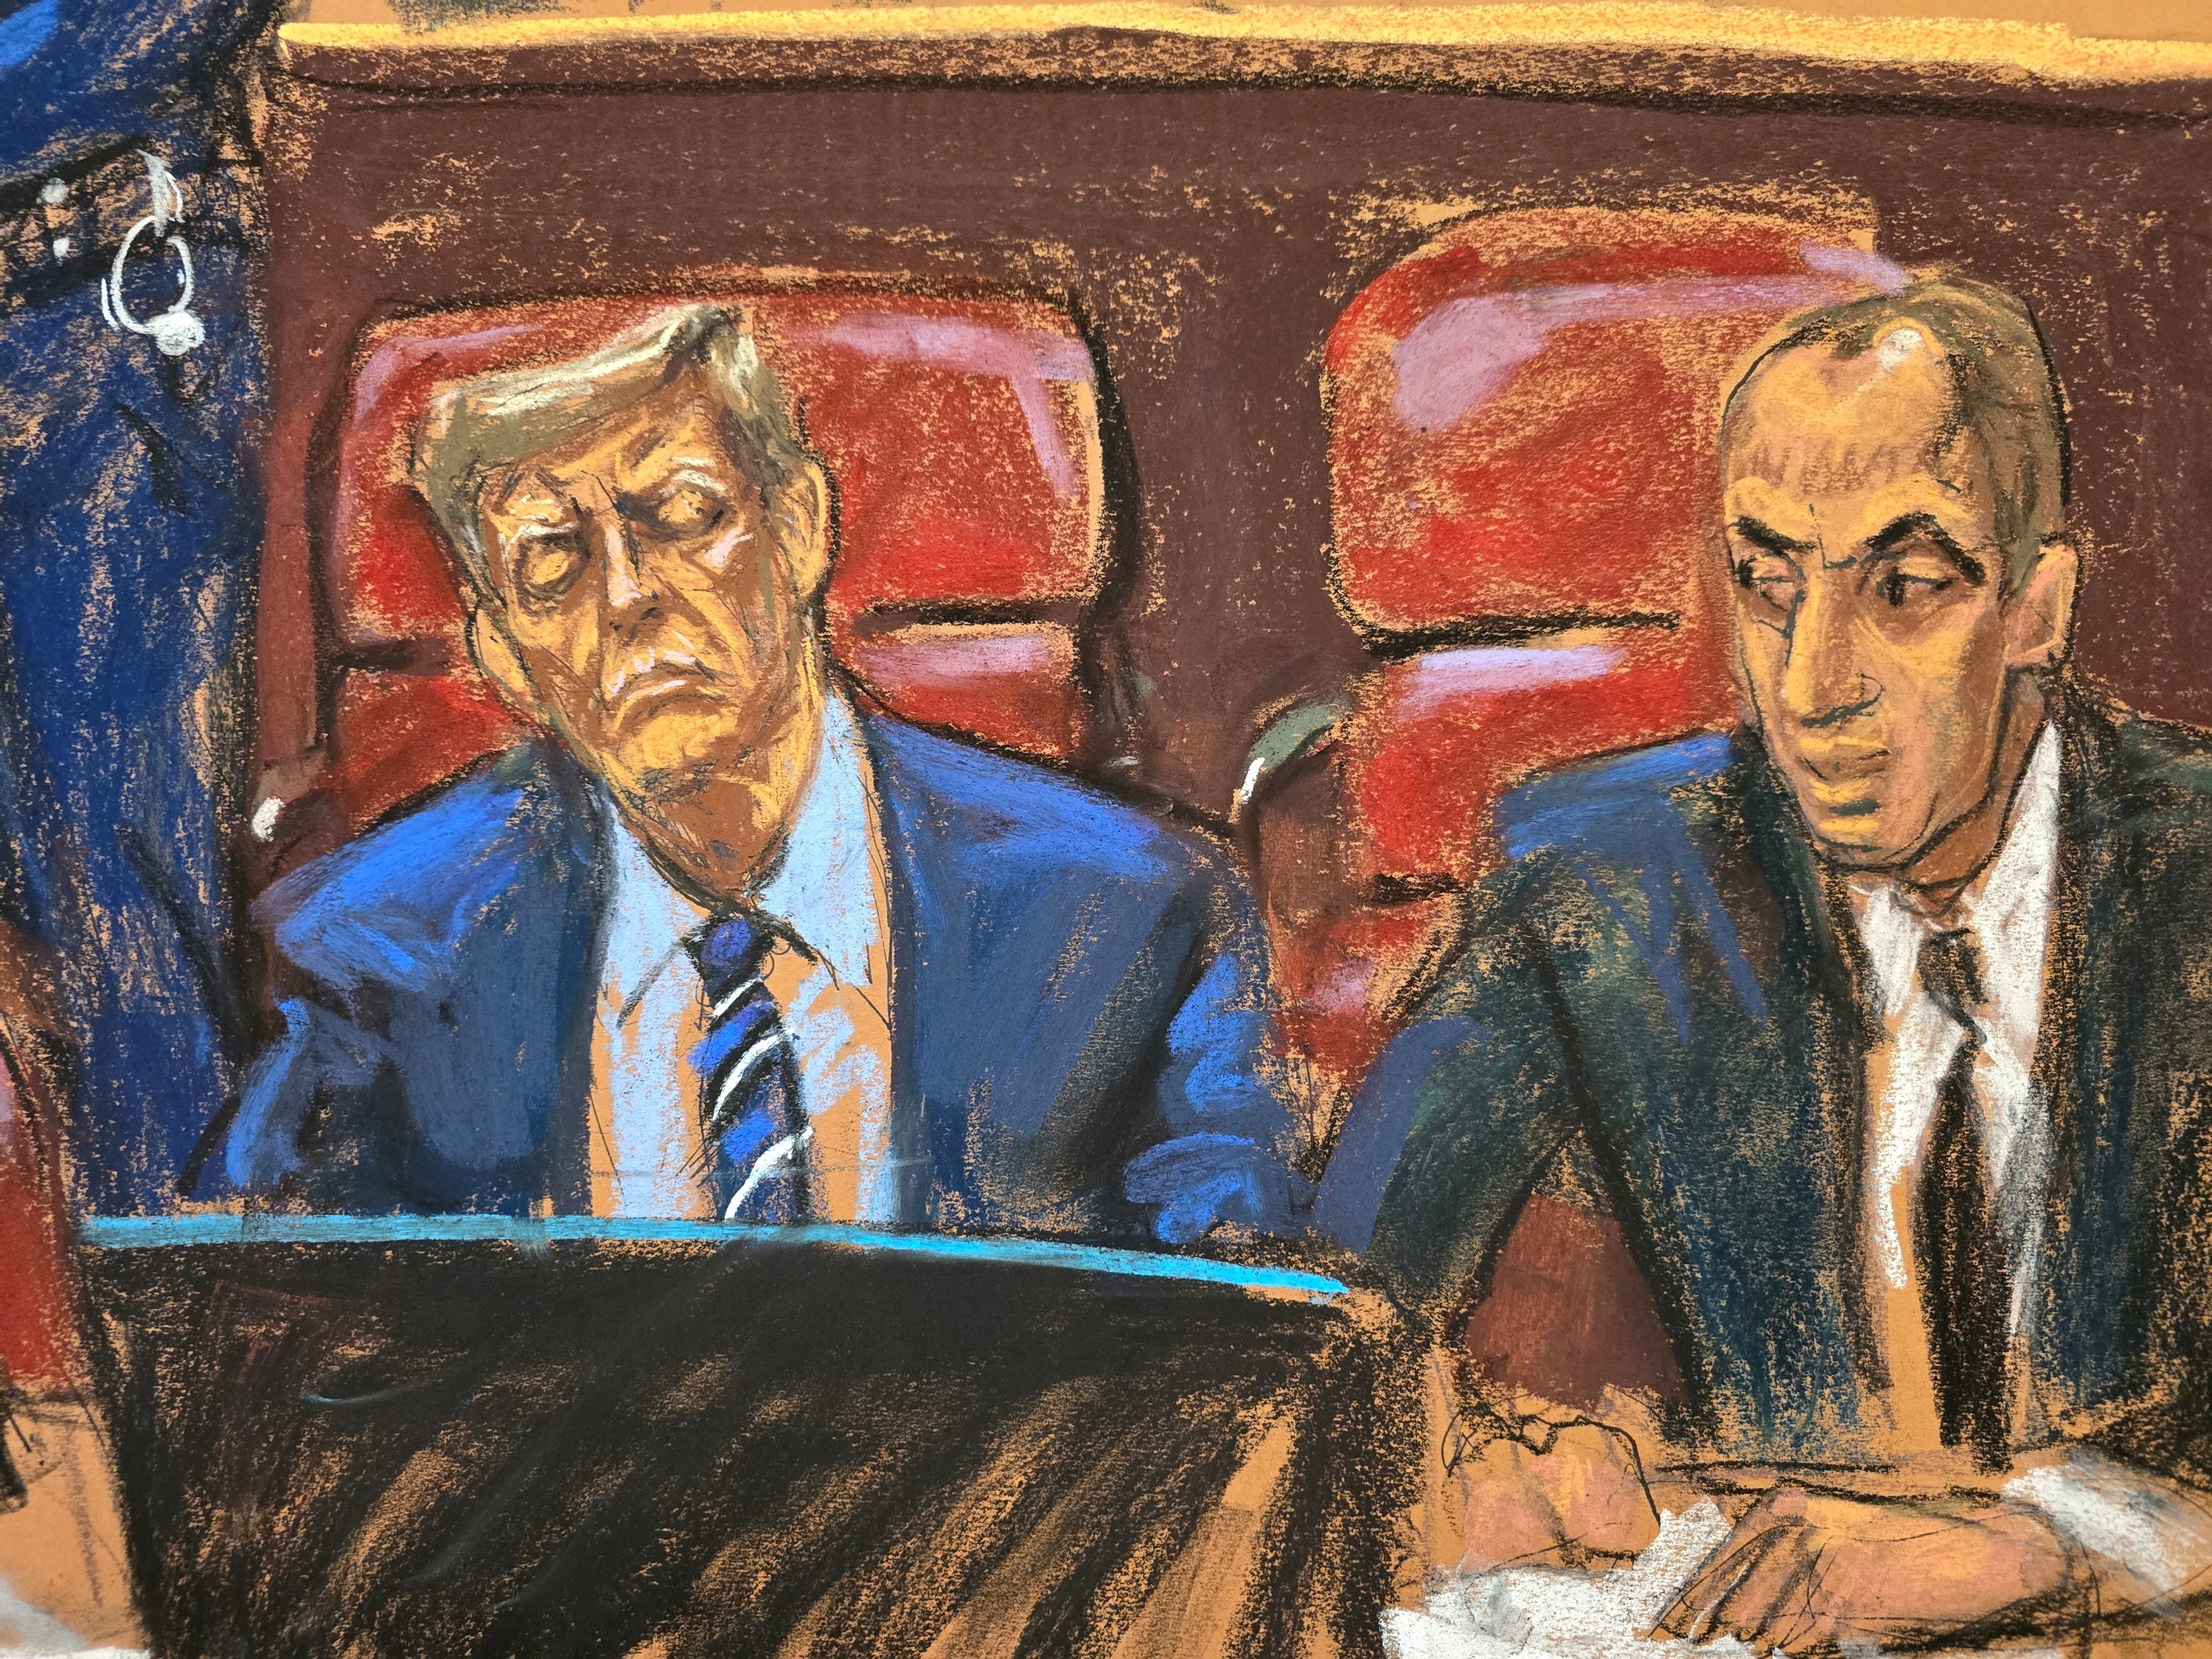 sleeping, smirking and stalking out of court: donald trump’s first week of criminal trial in pictures